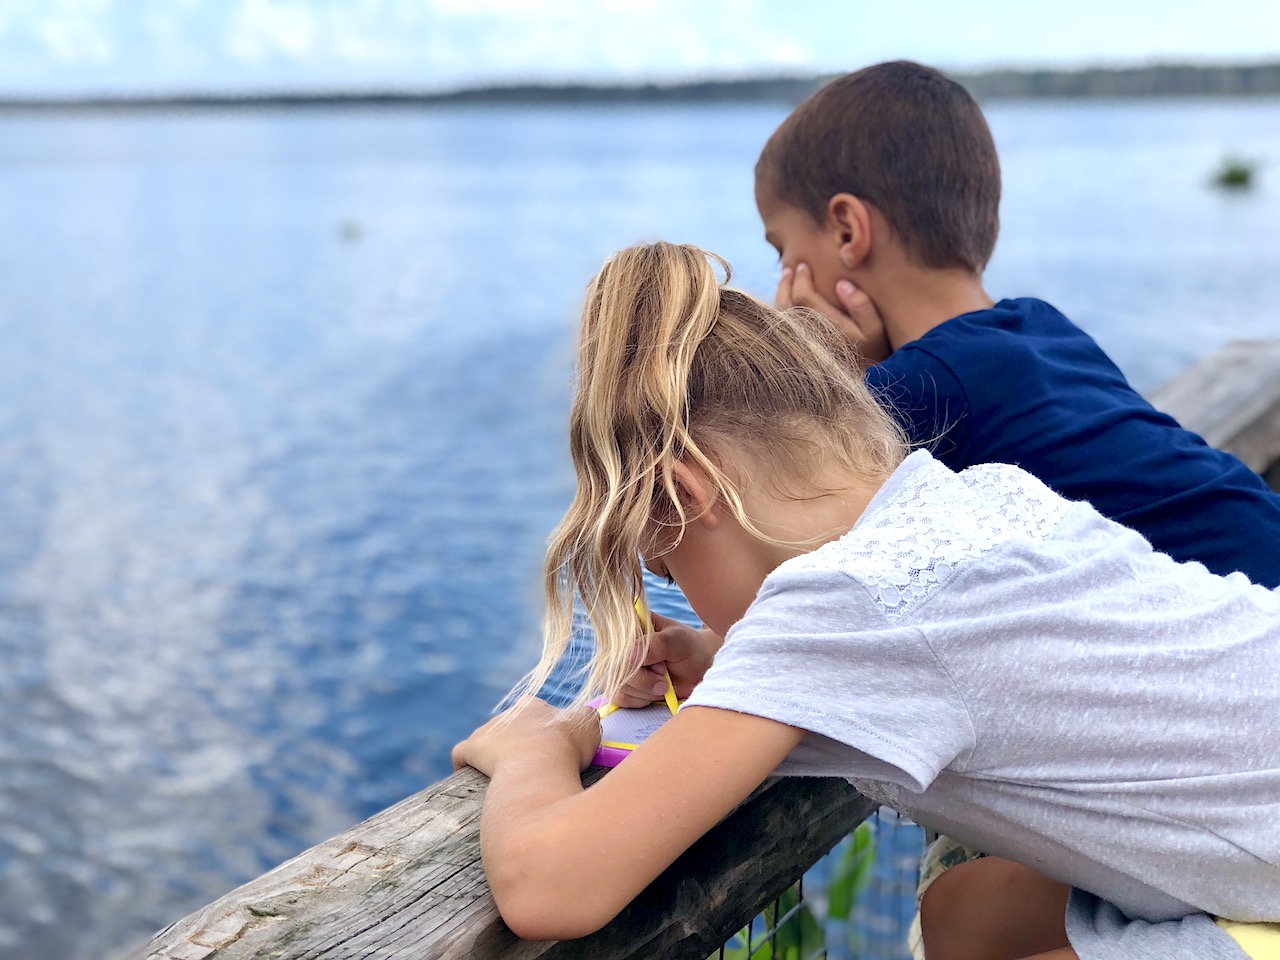 Kids in Gainesville - 2-day itinerary for families in Gainesville, FL #gainesville #florida #tourofflorida #alachuacounty #gainesvilleFL #universityofflorida #UF #gogators #Gainesvillewithkids #gainesvilleitinerary